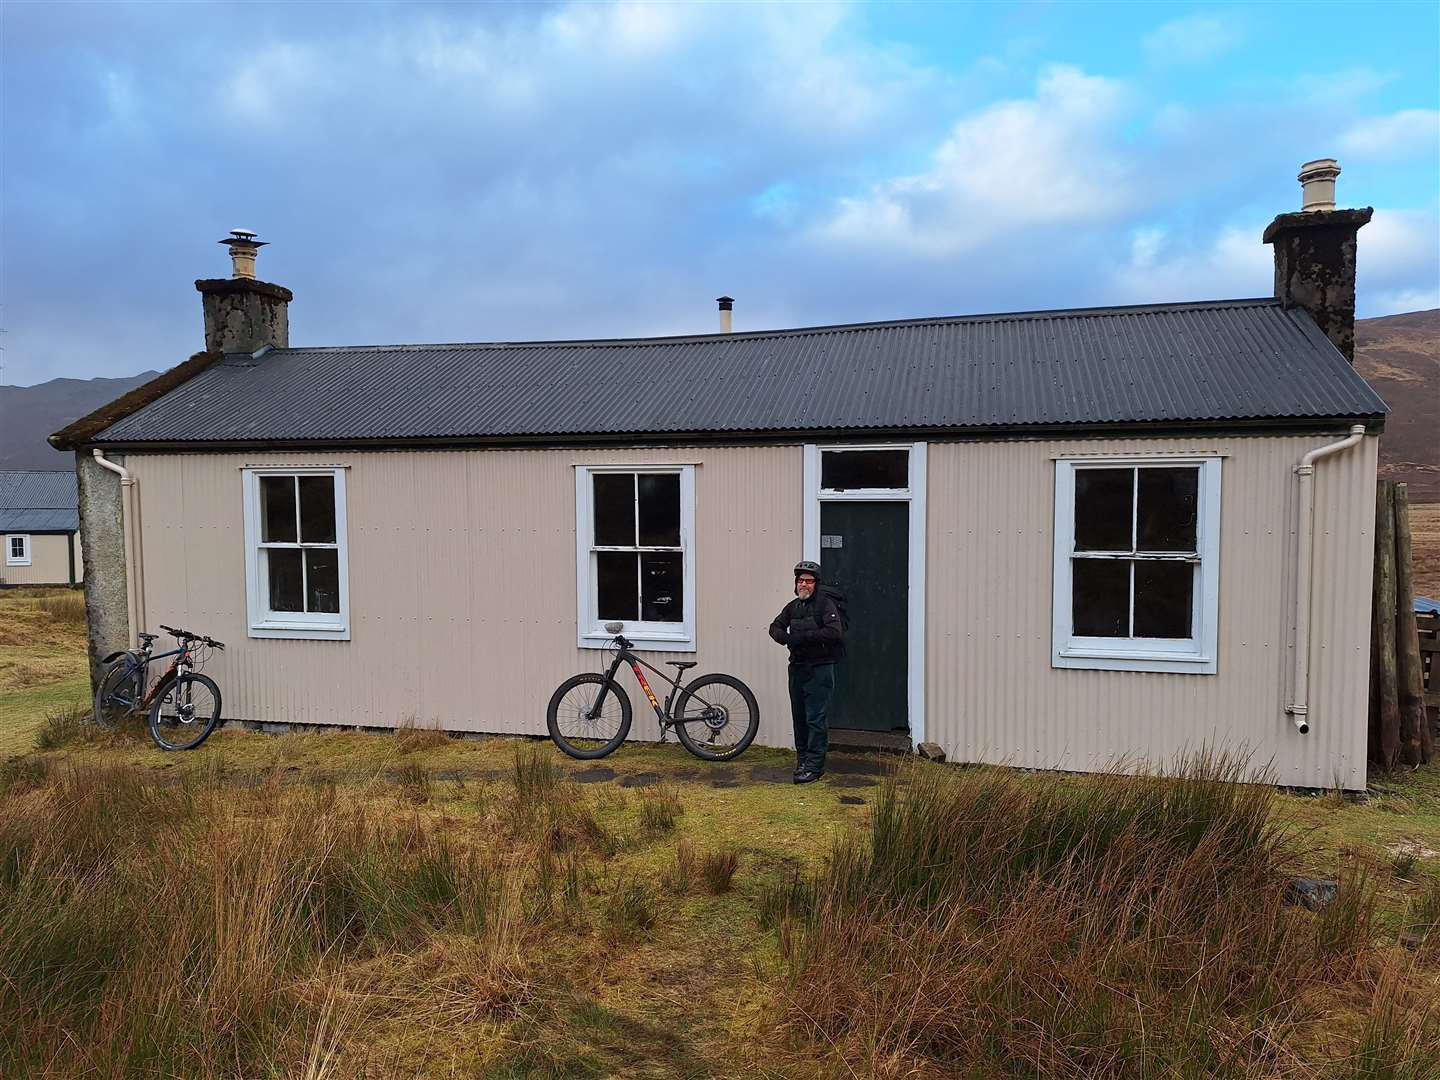 The Bendronaig bothy is provided by the estate for walkers to use responsibly.